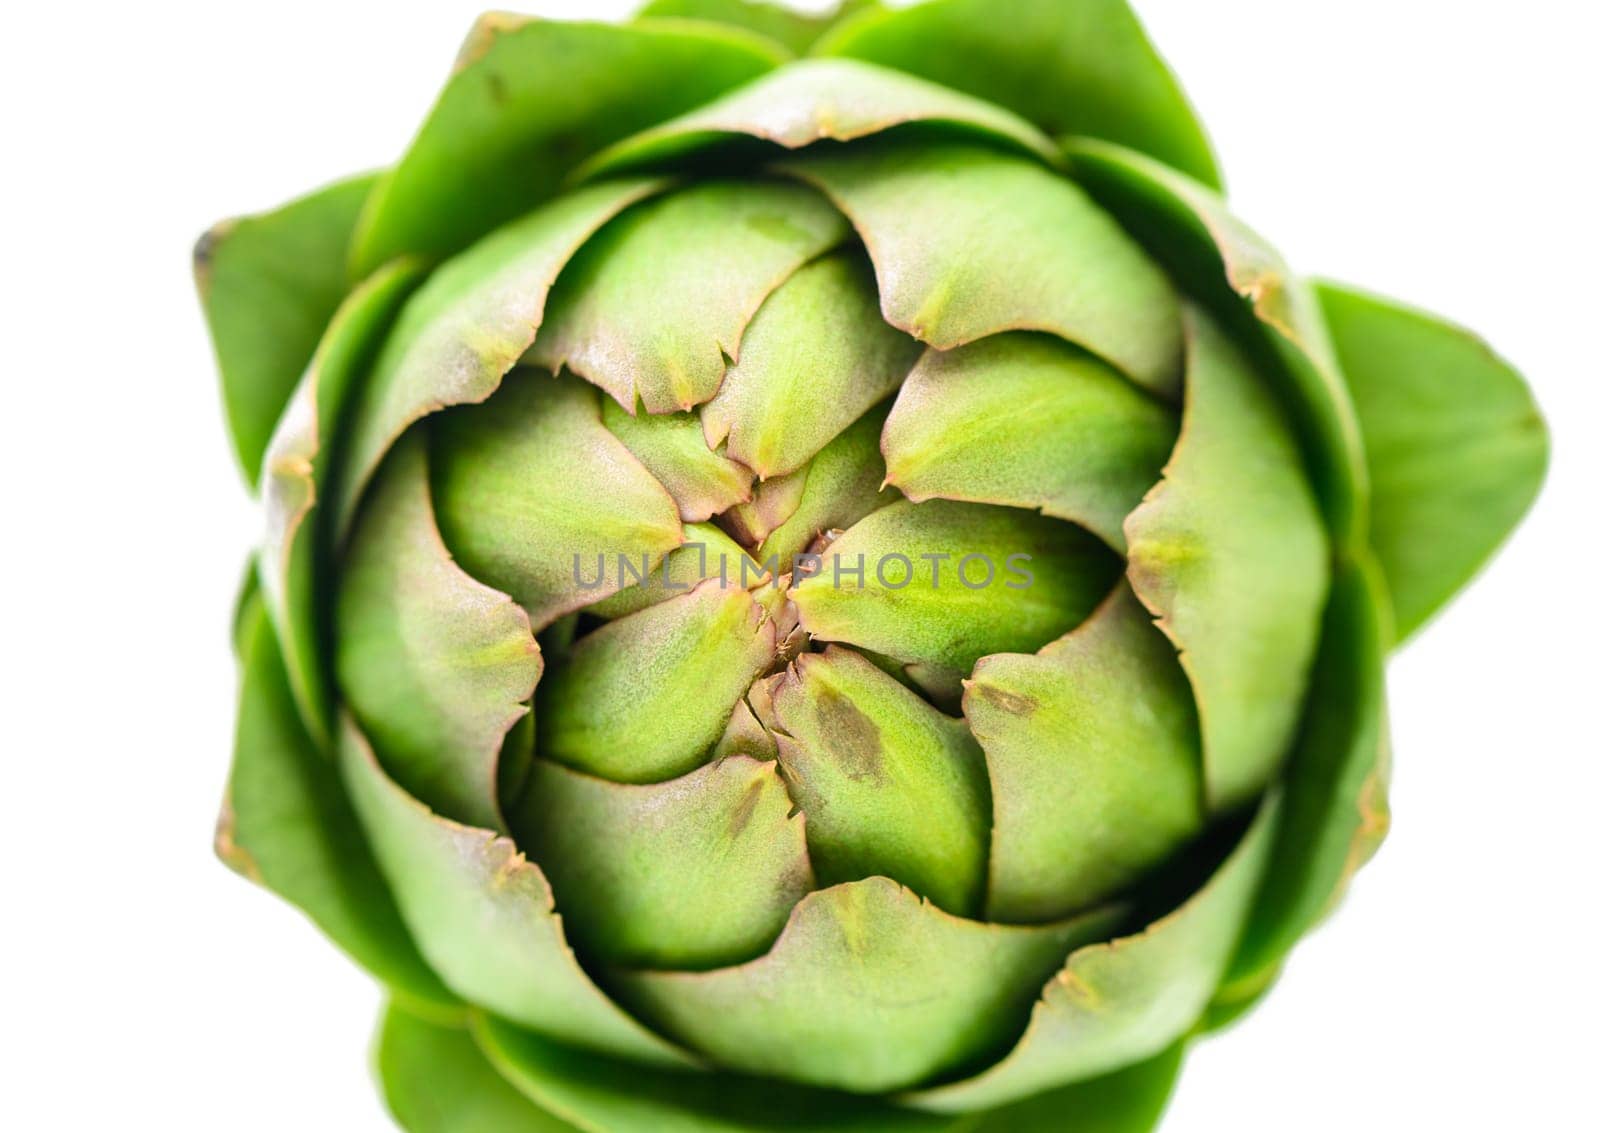 A detailed close up of a green artichoke on a clean white background. Perfect for food or cooking-related projects.1 by Mixa74